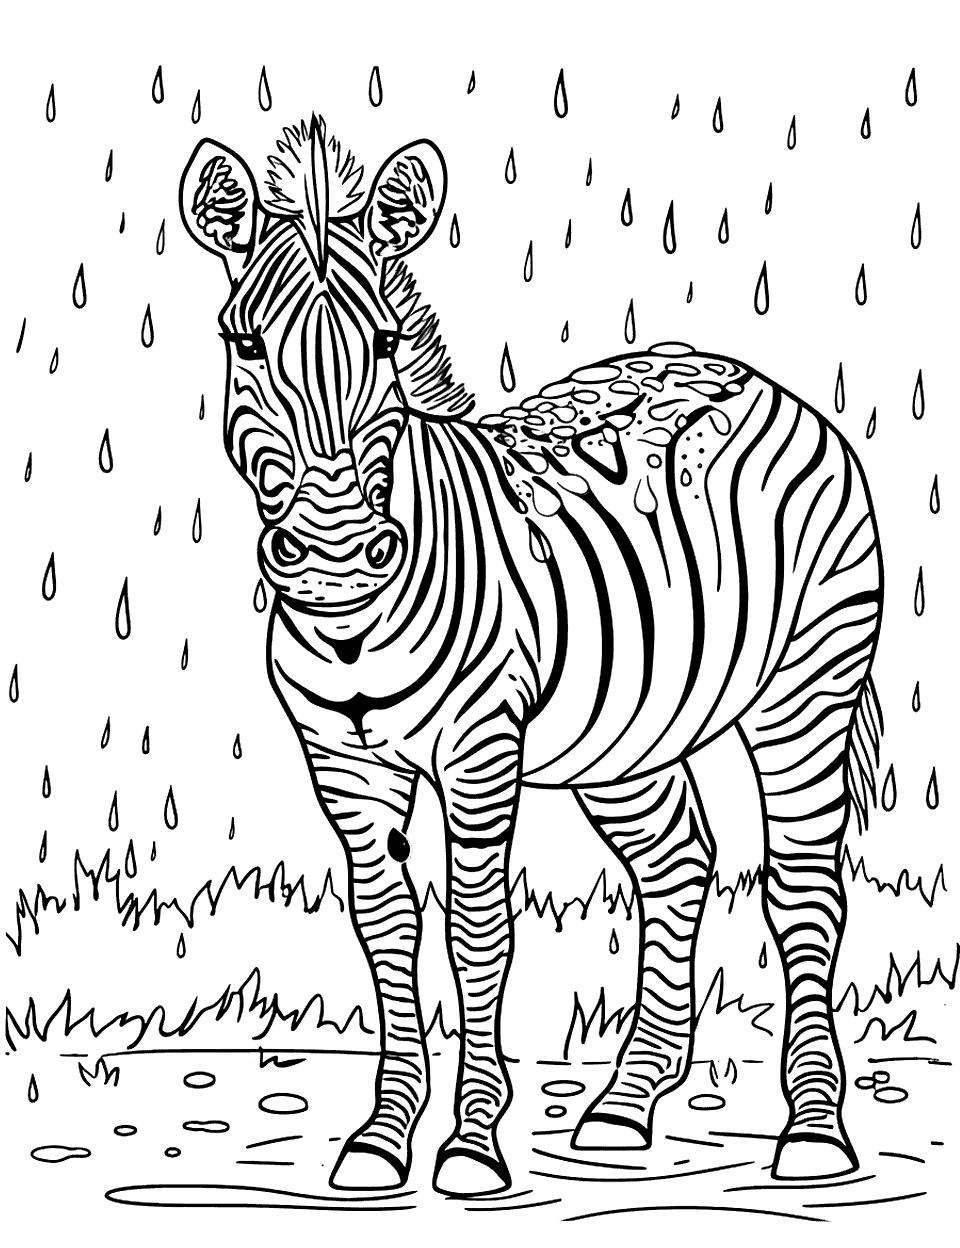 Zebra in the Rain Coloring Page - A zebra with droplets of rain on its body during a light shower.